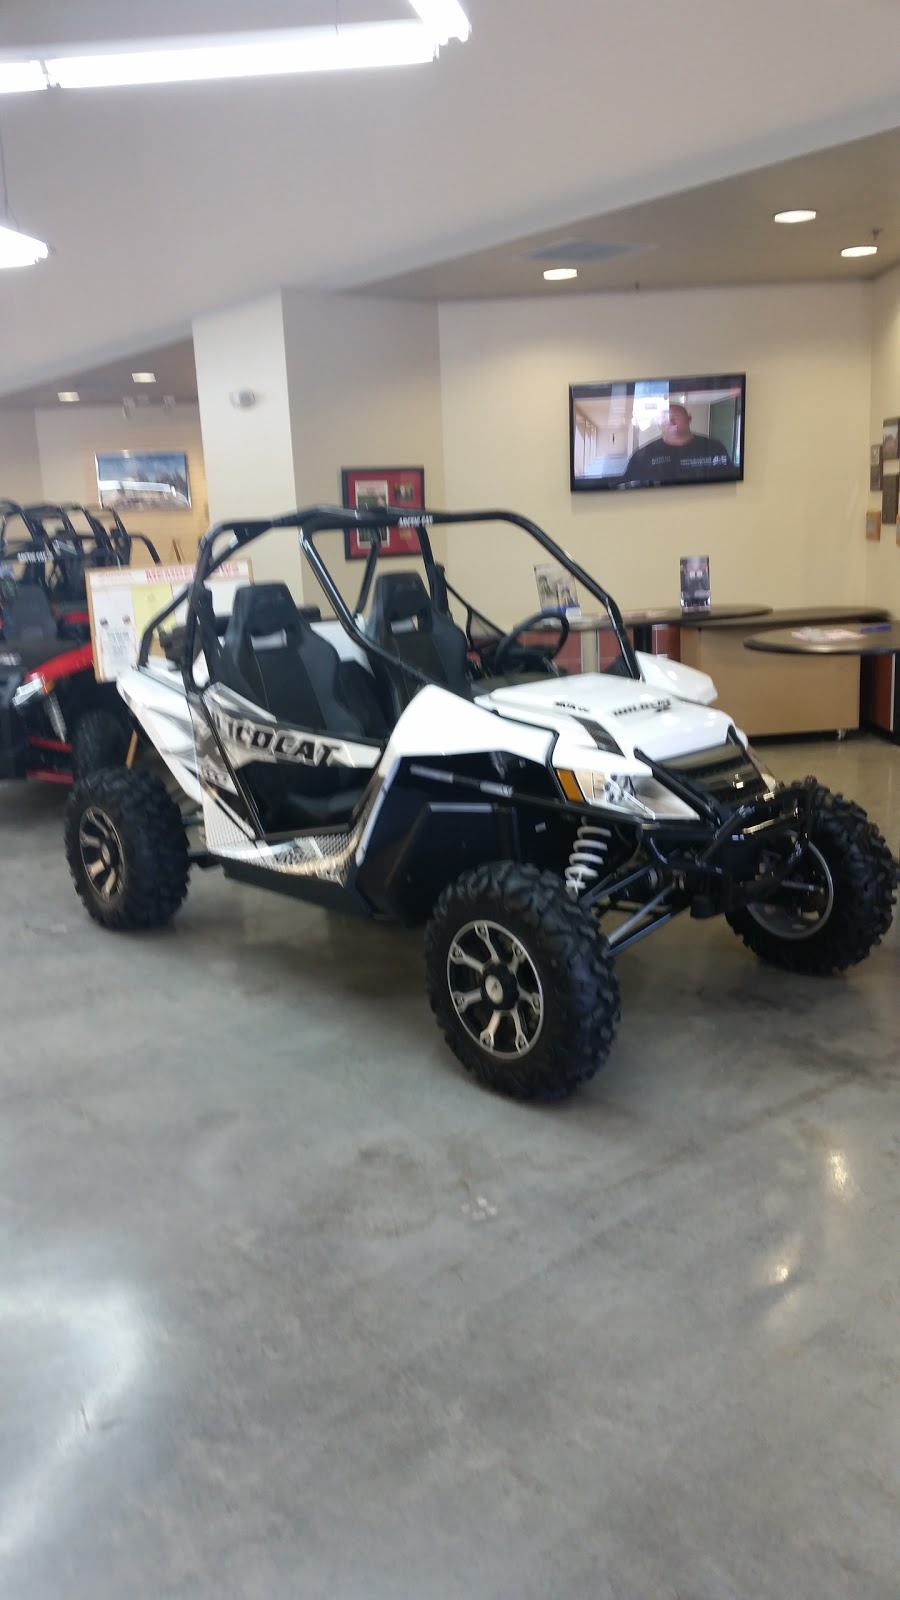 Kentucky Motorsports and Outdoors | 1618 Northgate Dr, Richmond, KY 40475 | Phone: (859) 623-5900